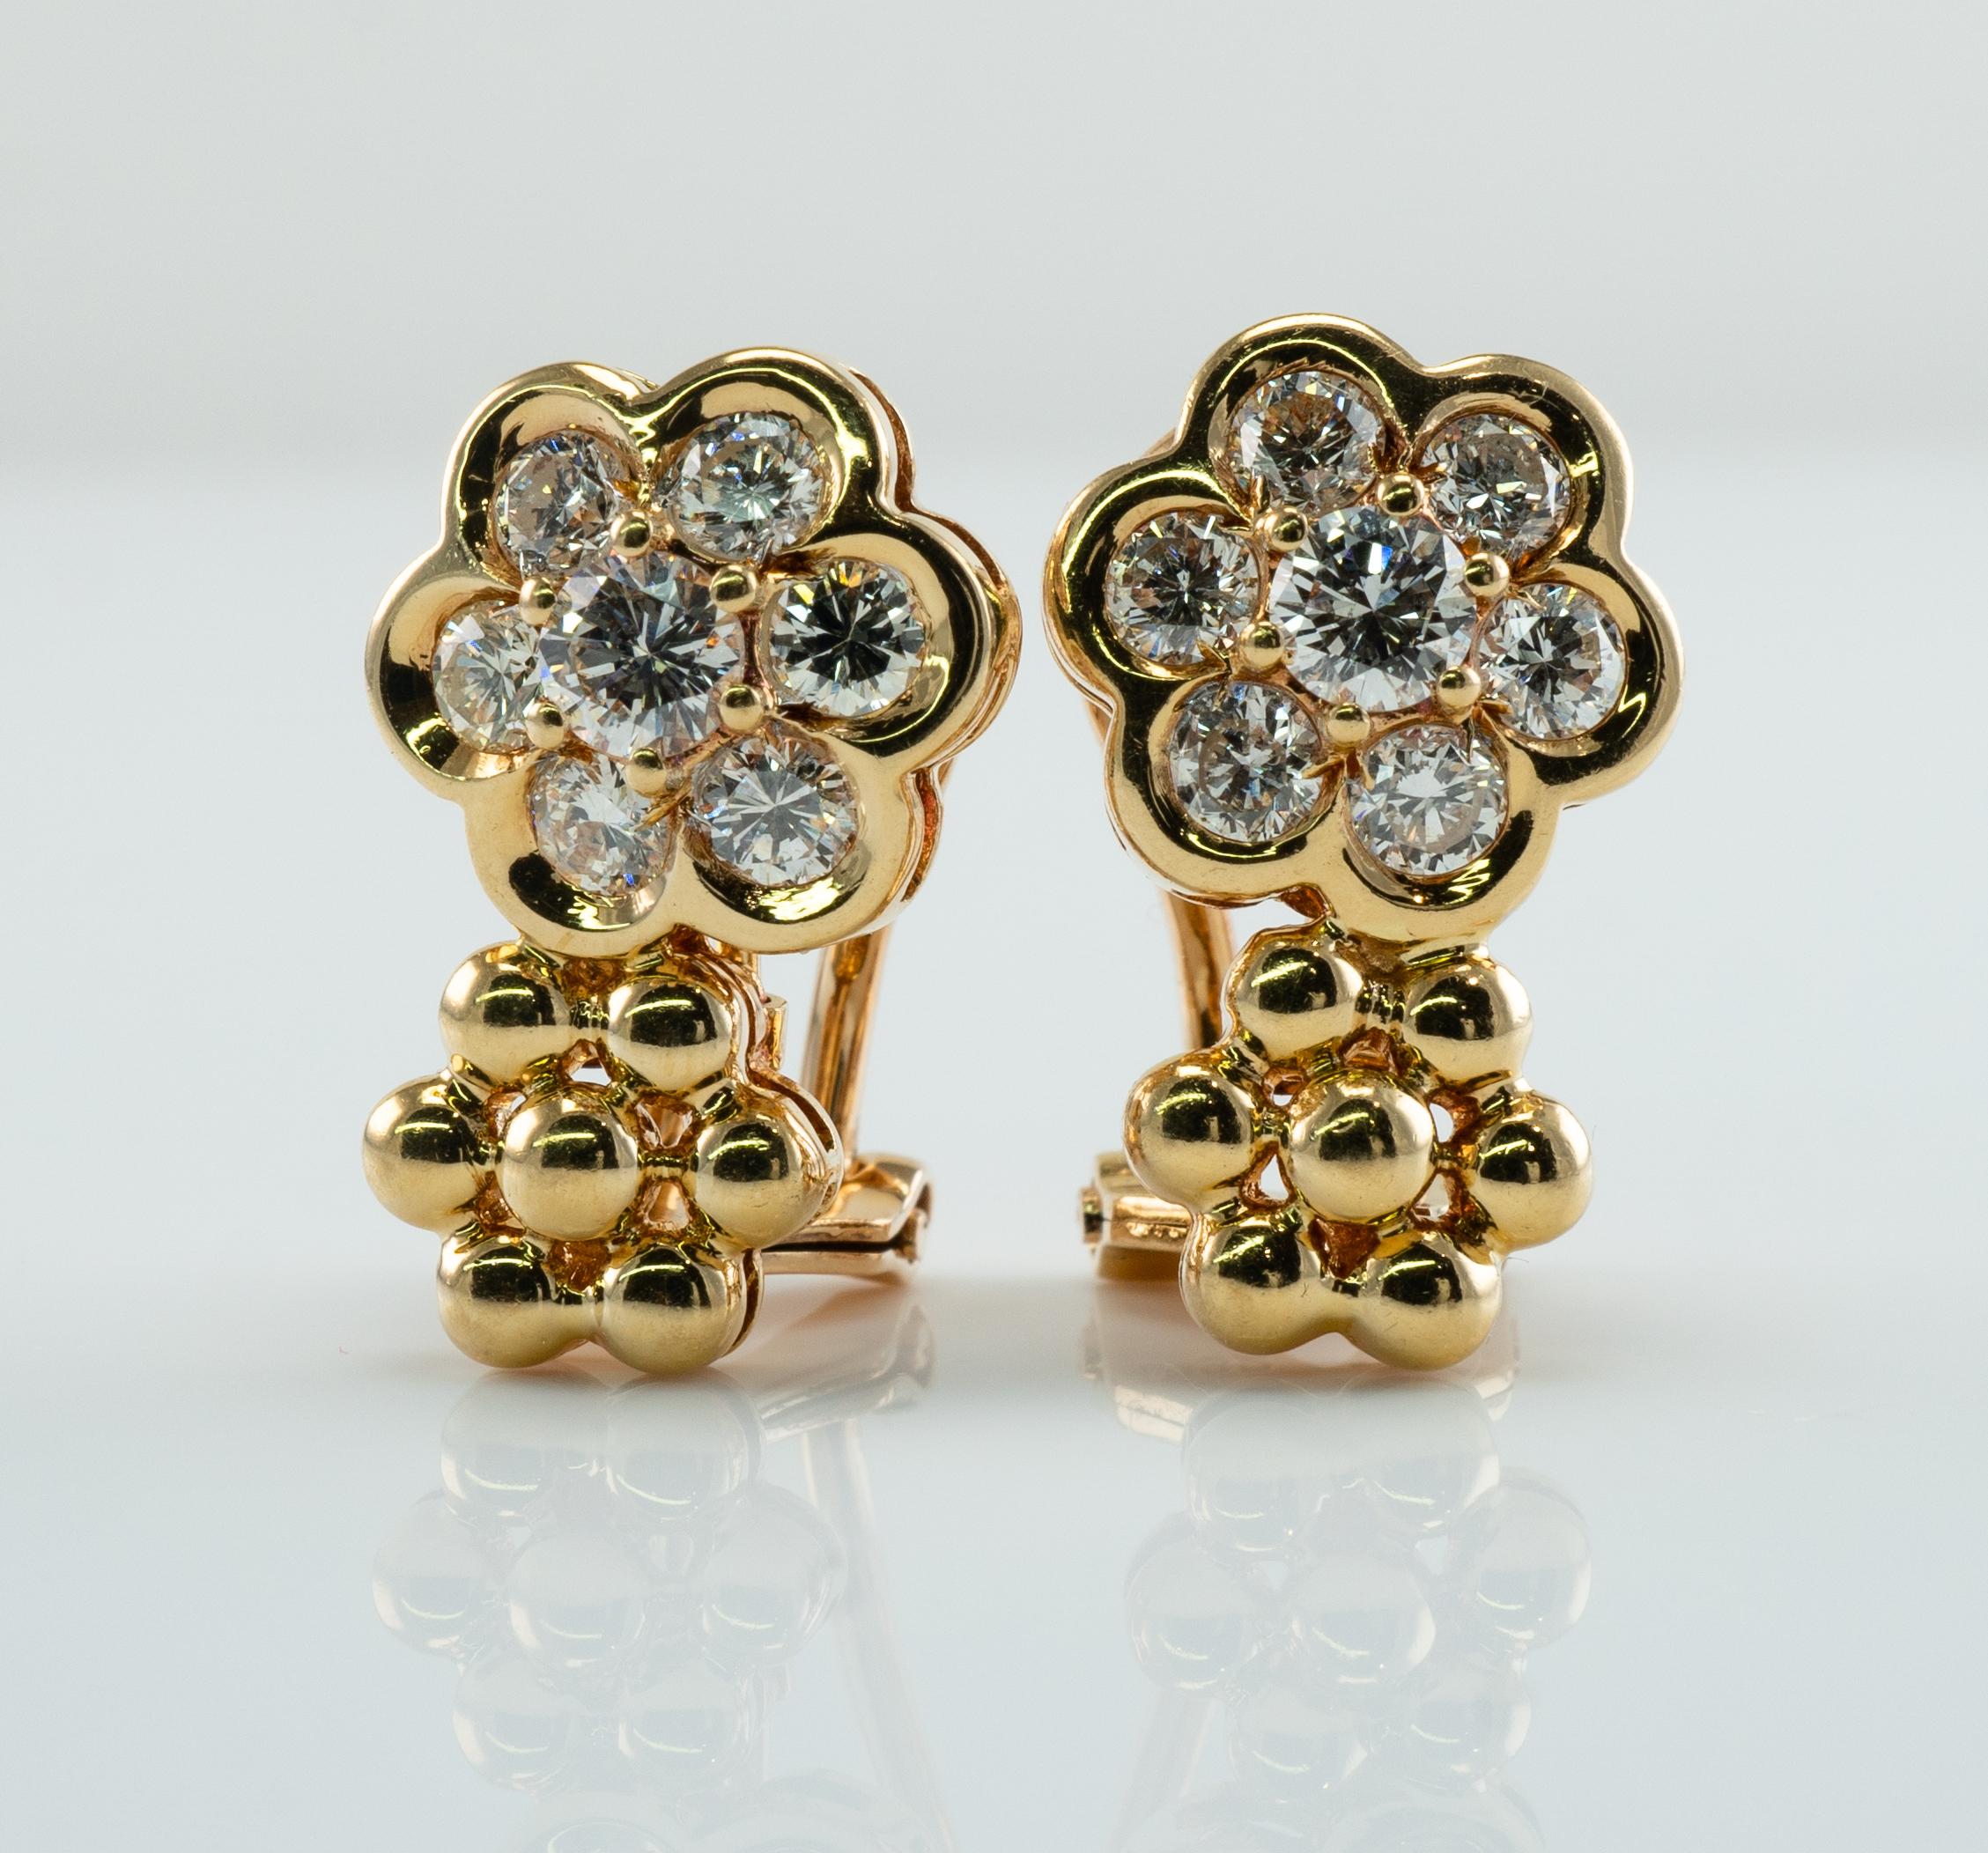 Cluster Diamond Flower Earrings 18K Gold 1.32 TDW Convertible Pierced and Clips In Good Condition For Sale In East Brunswick, NJ